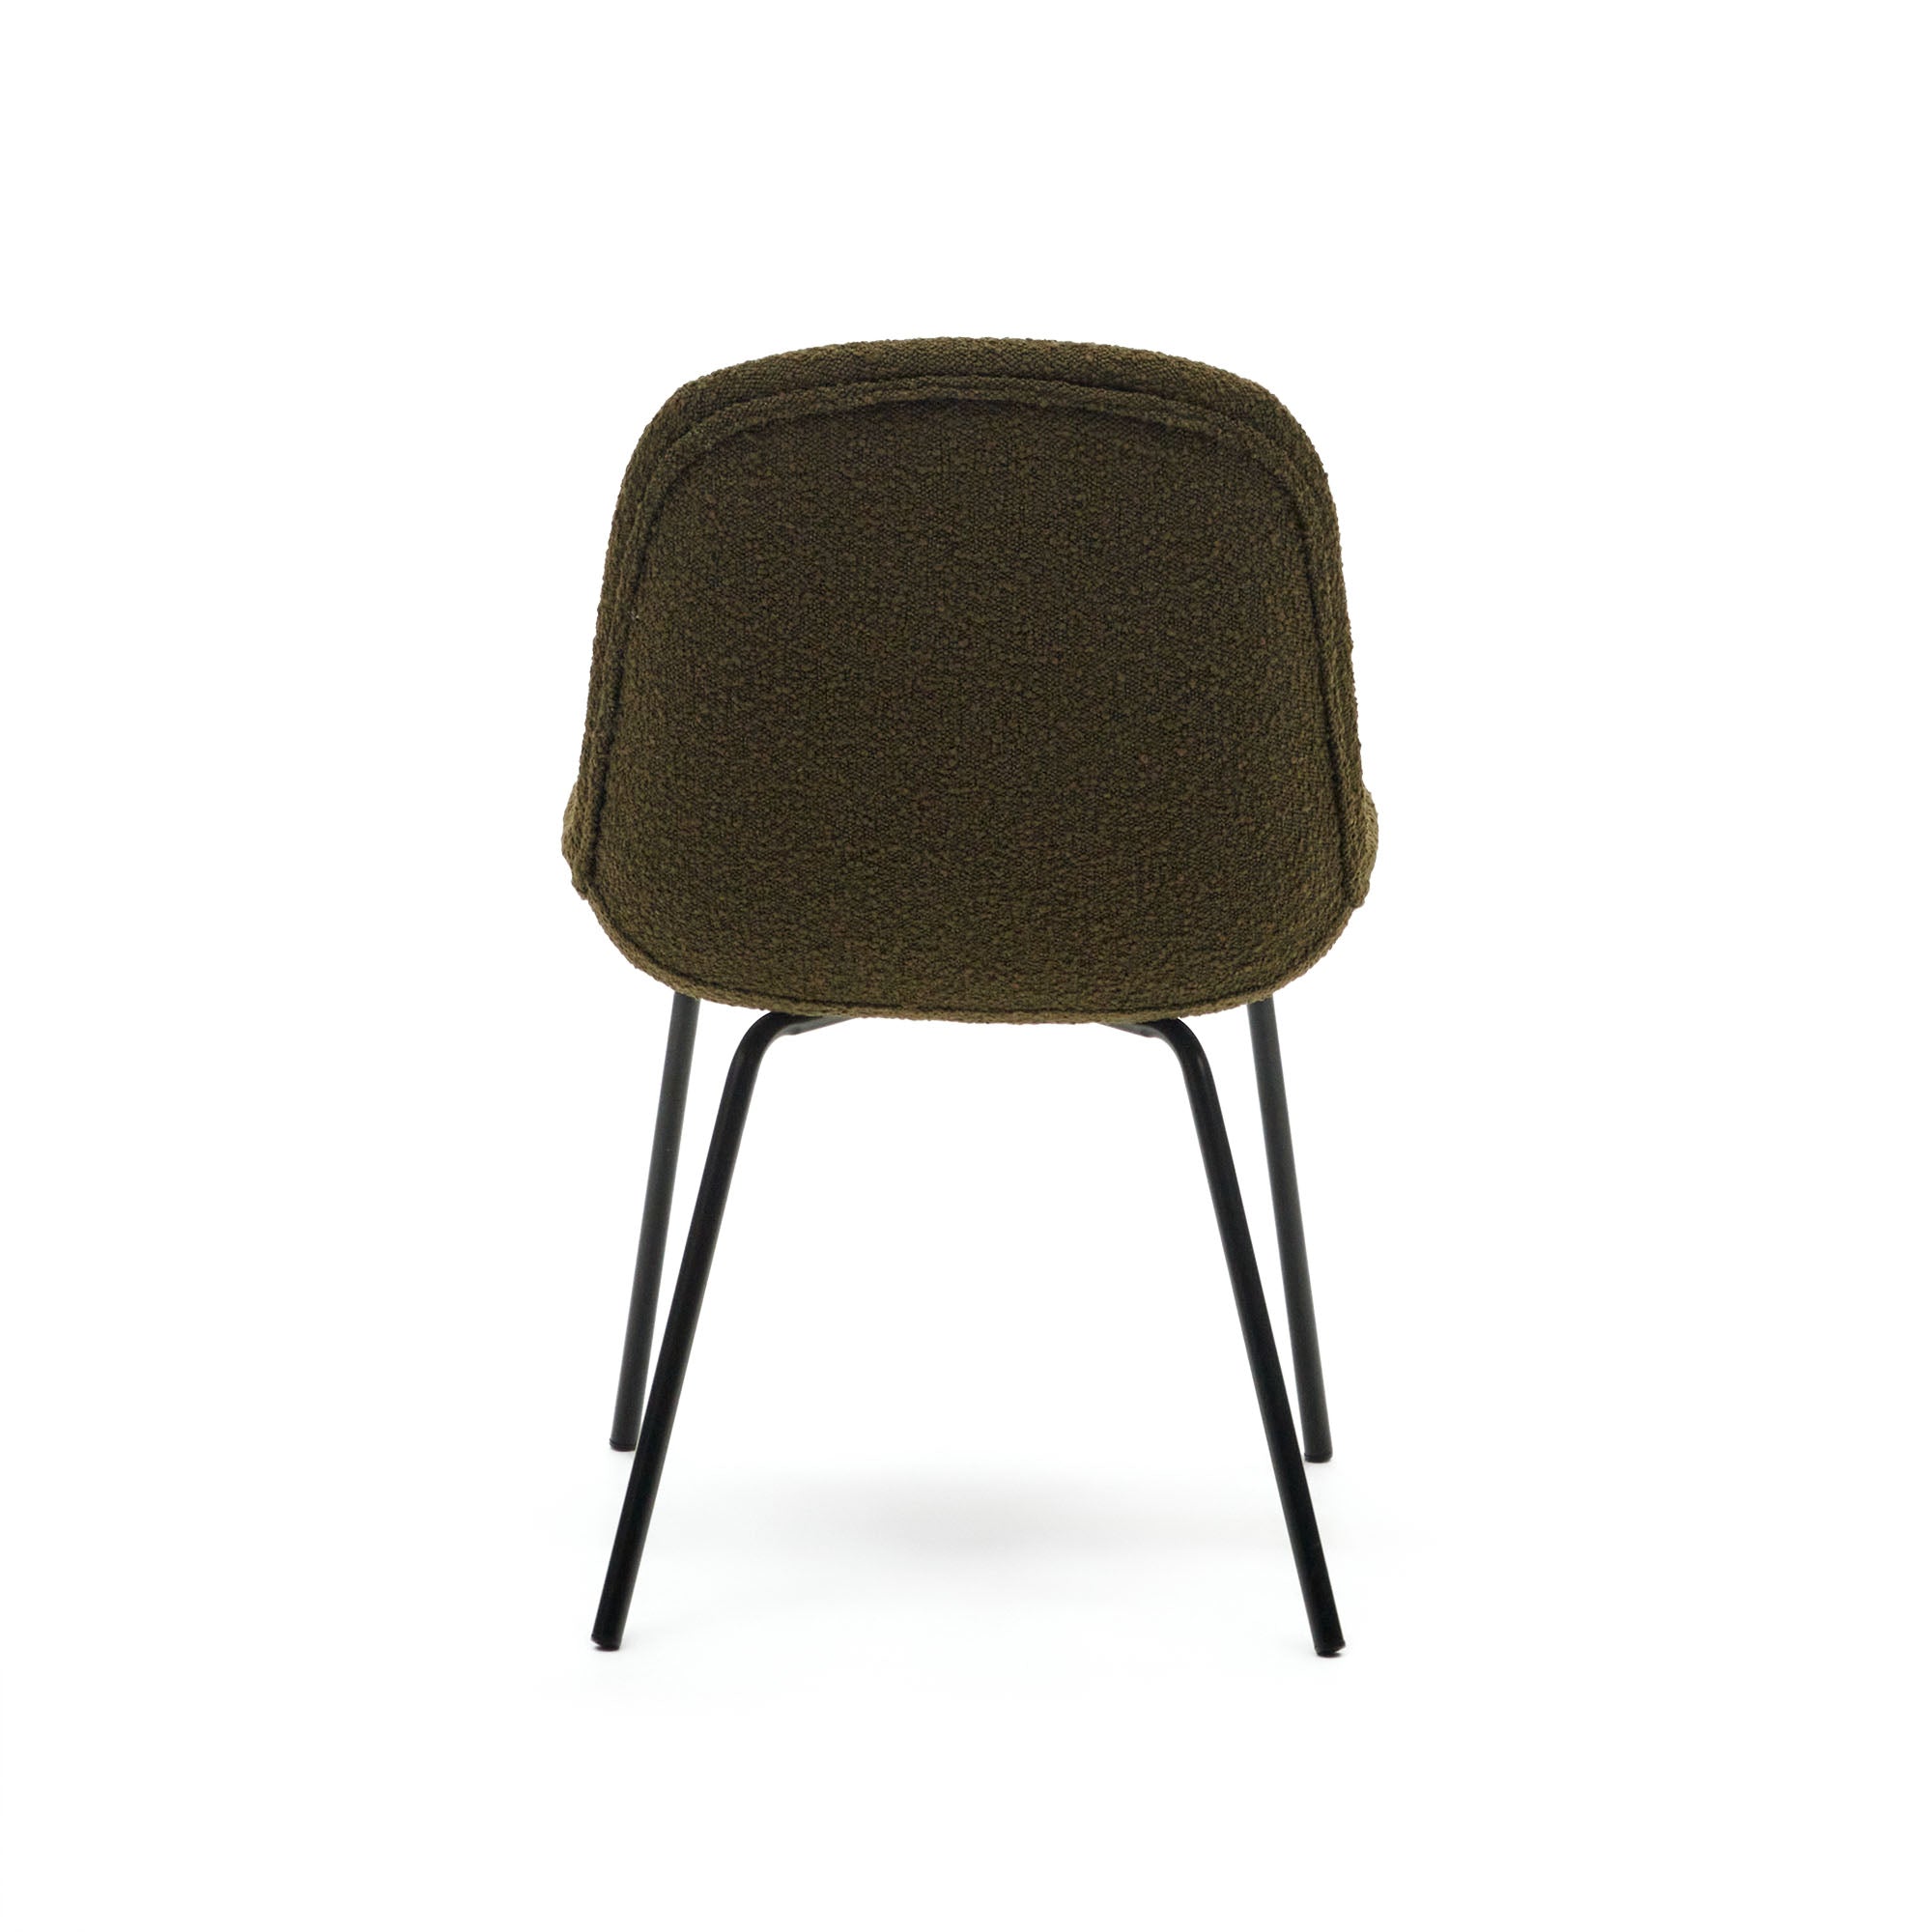 Aimin chair in green fleece and steel legs with a matte black painted finish